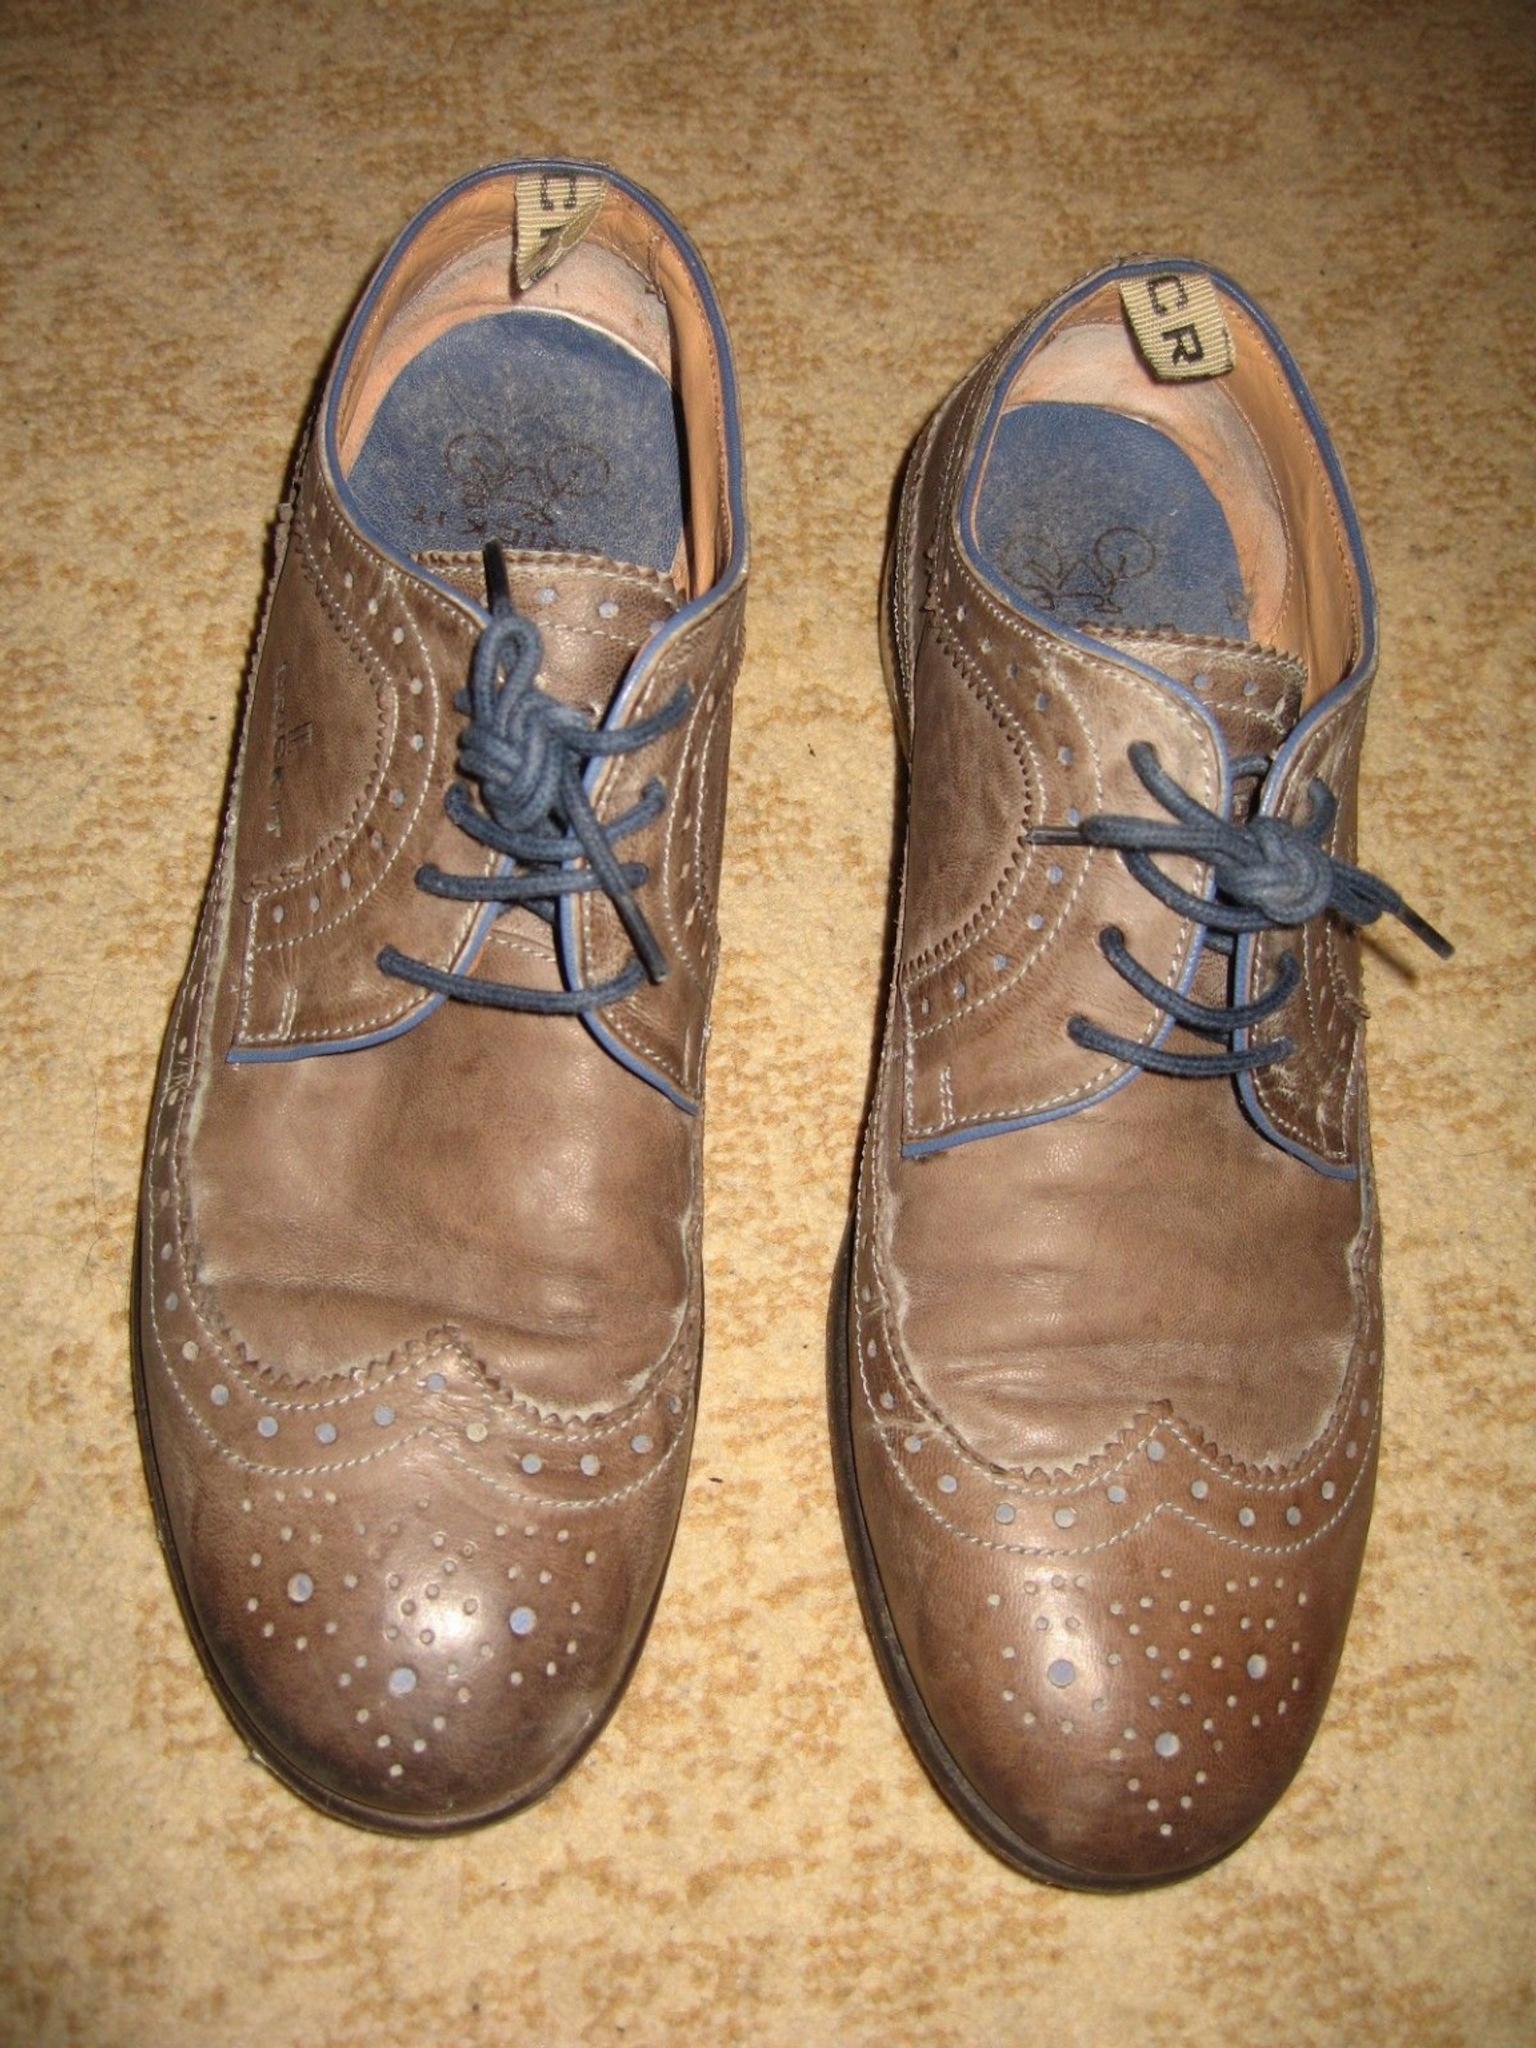 size 41 in mens shoes